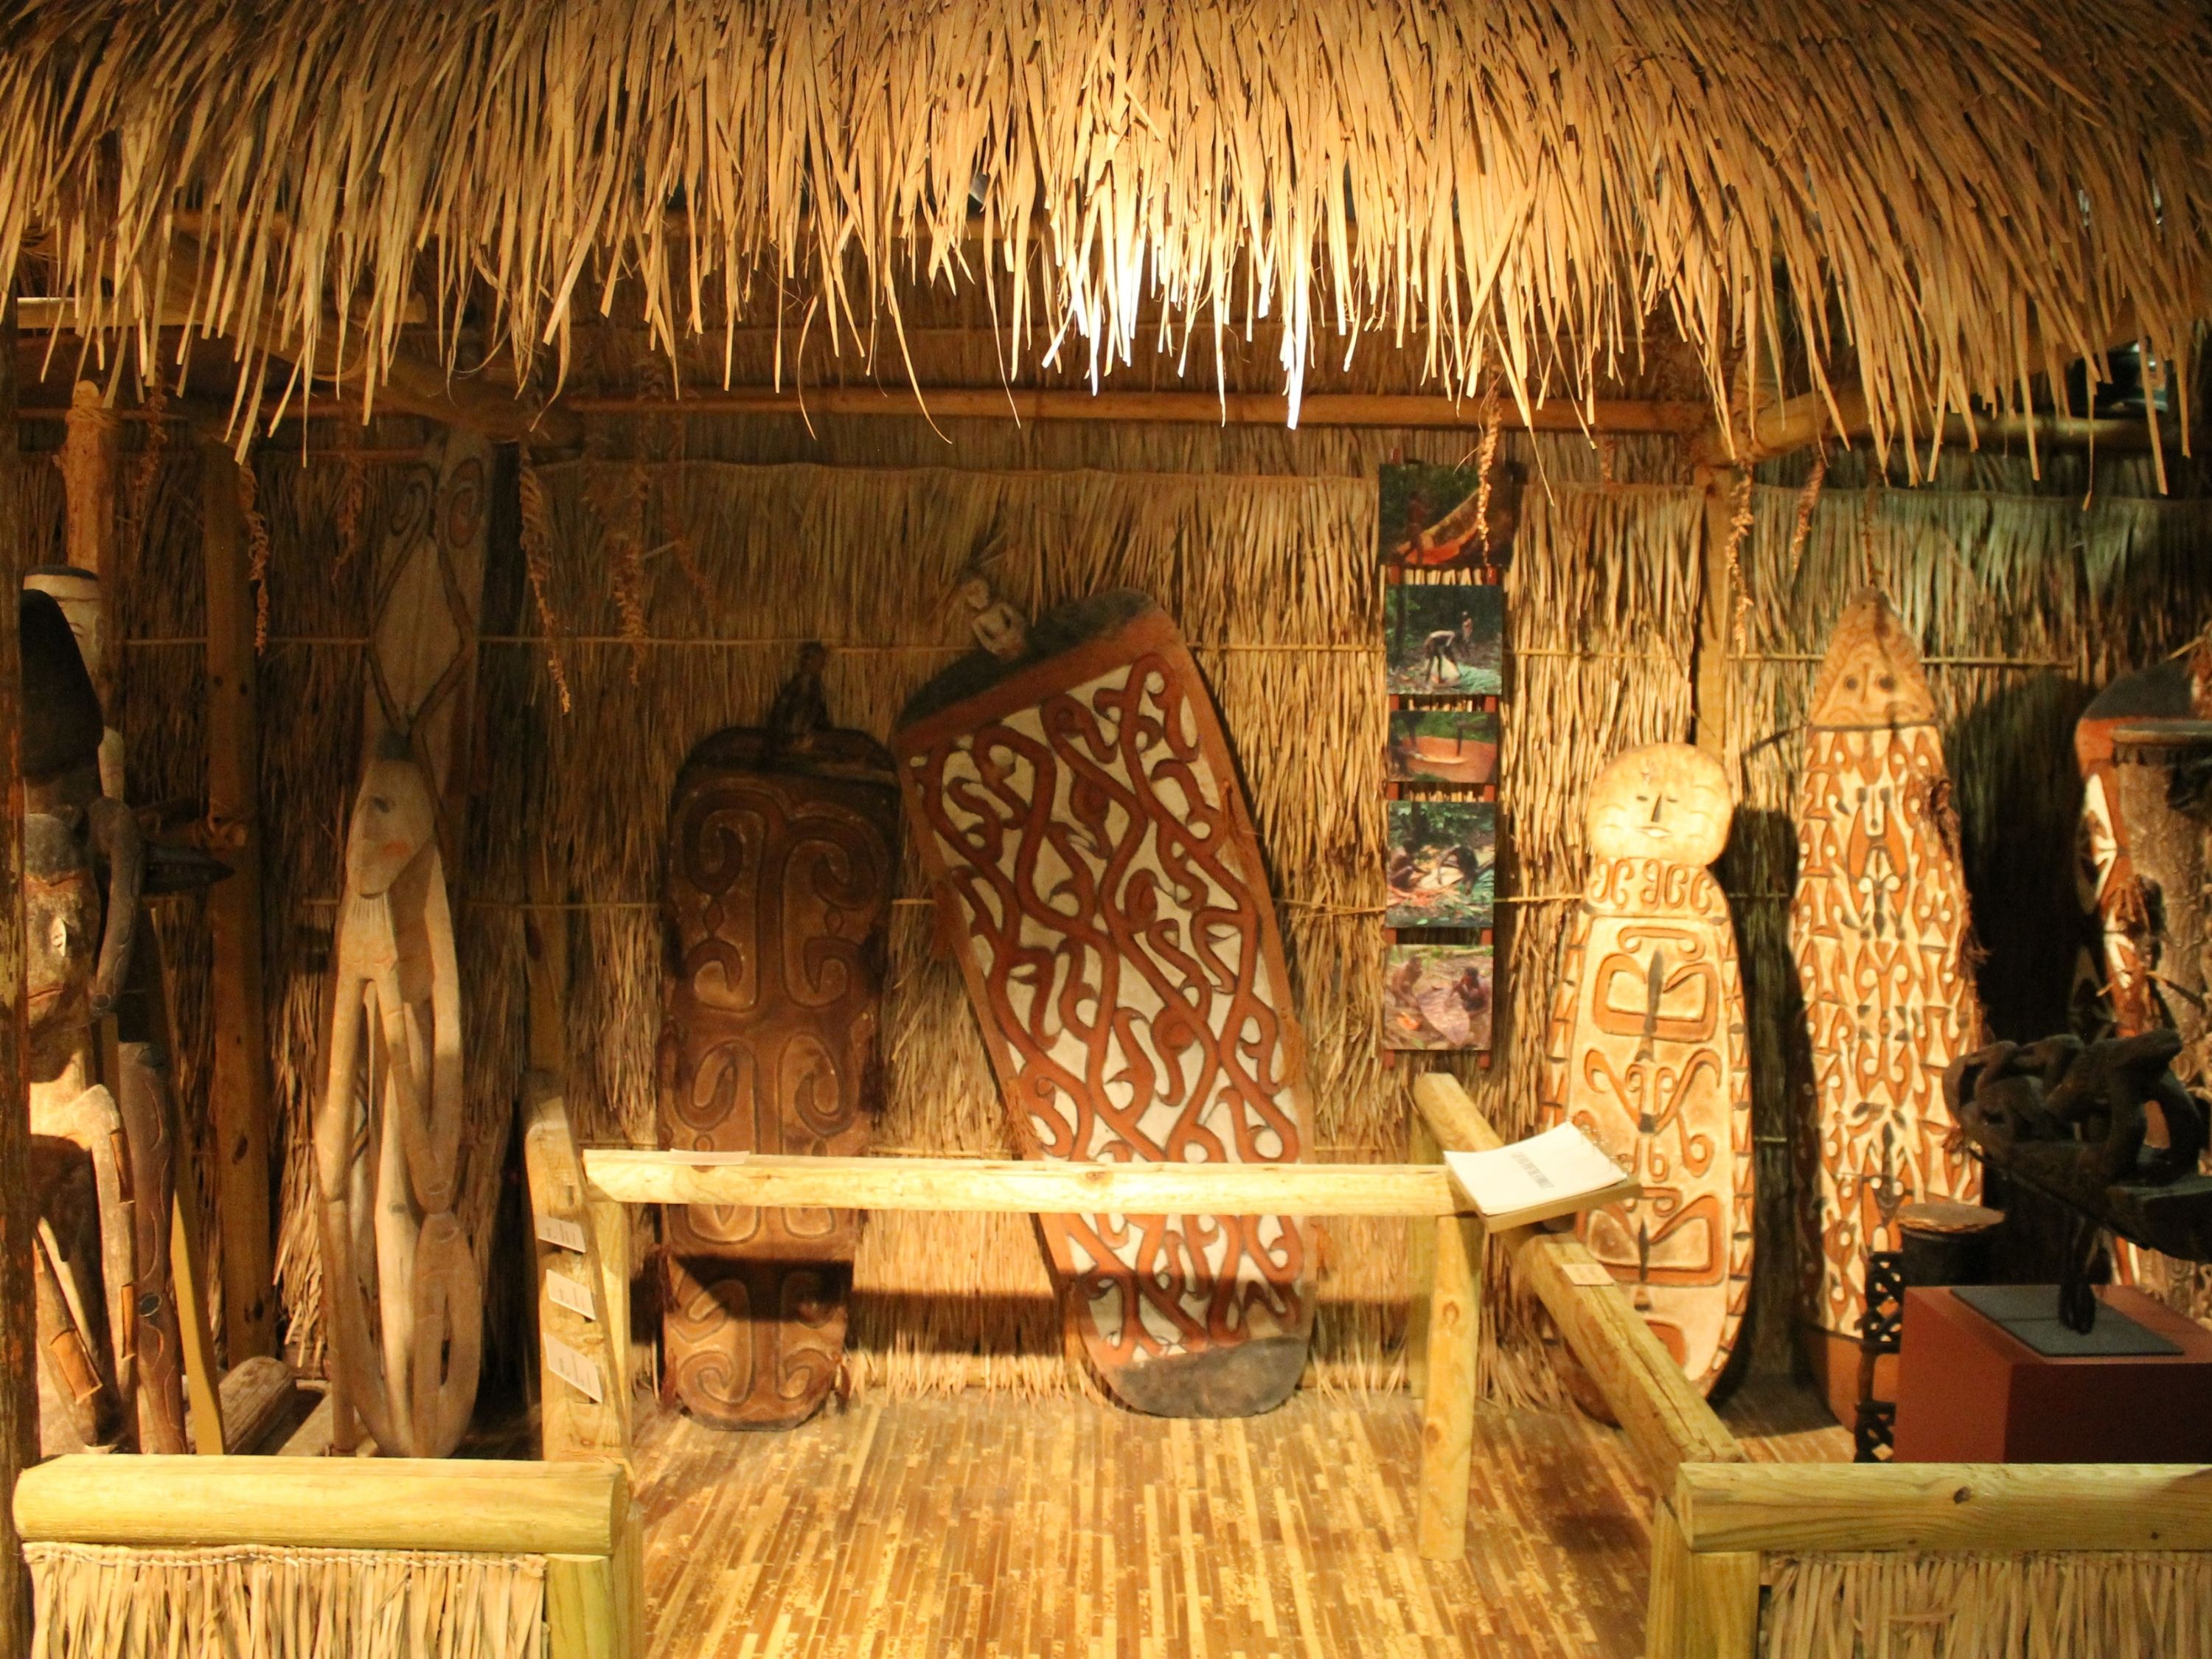 Interior of a hut with shield, drums, and other carvings displayed.  In the front of the exhibit is a flipbook containing information on the display. To the left are five photos that show how these shields are made. The first photo is of a man cutting down the root of a mangrove tree. The second is of two men carving out the removed piece and shaping it with tools. The third is removing the wood’s bark. The fourth and fifth are of the two men drawing on the symbols